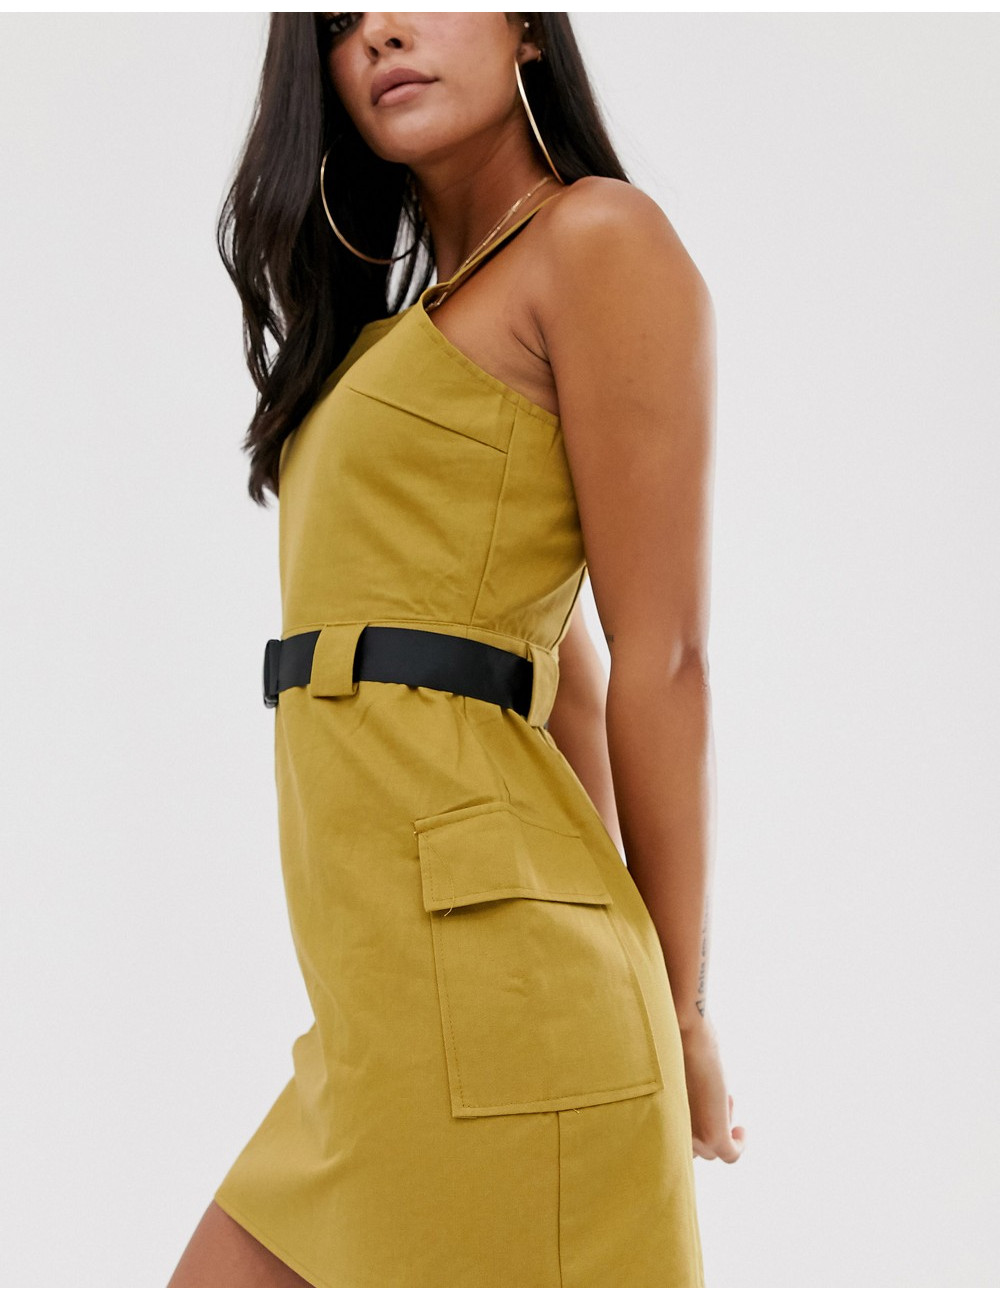 Missguided utility dress...